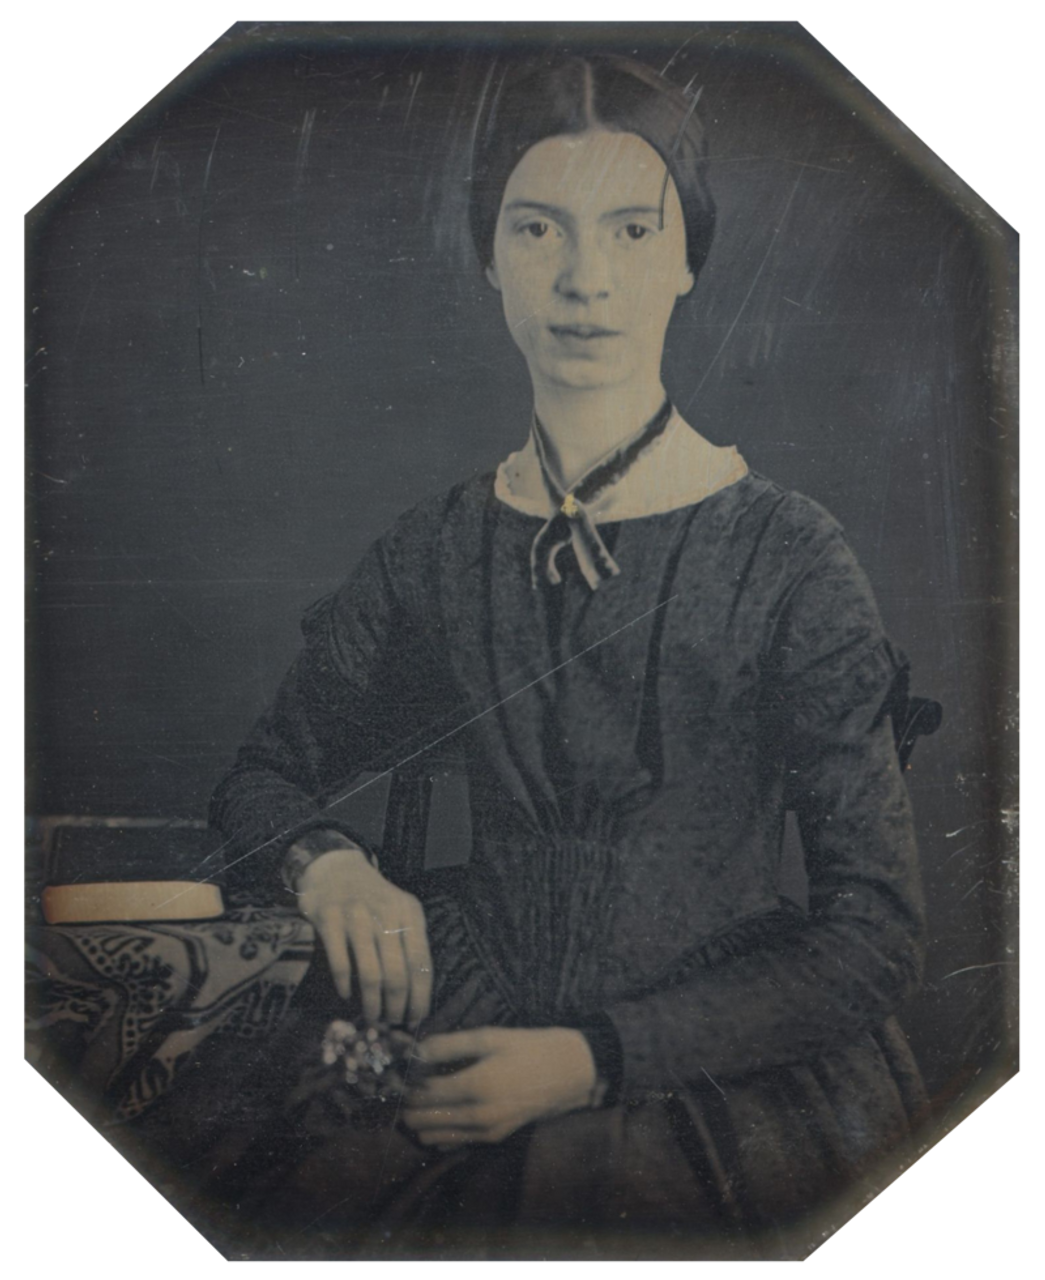 Emily Dickinson in 1846 or 1847